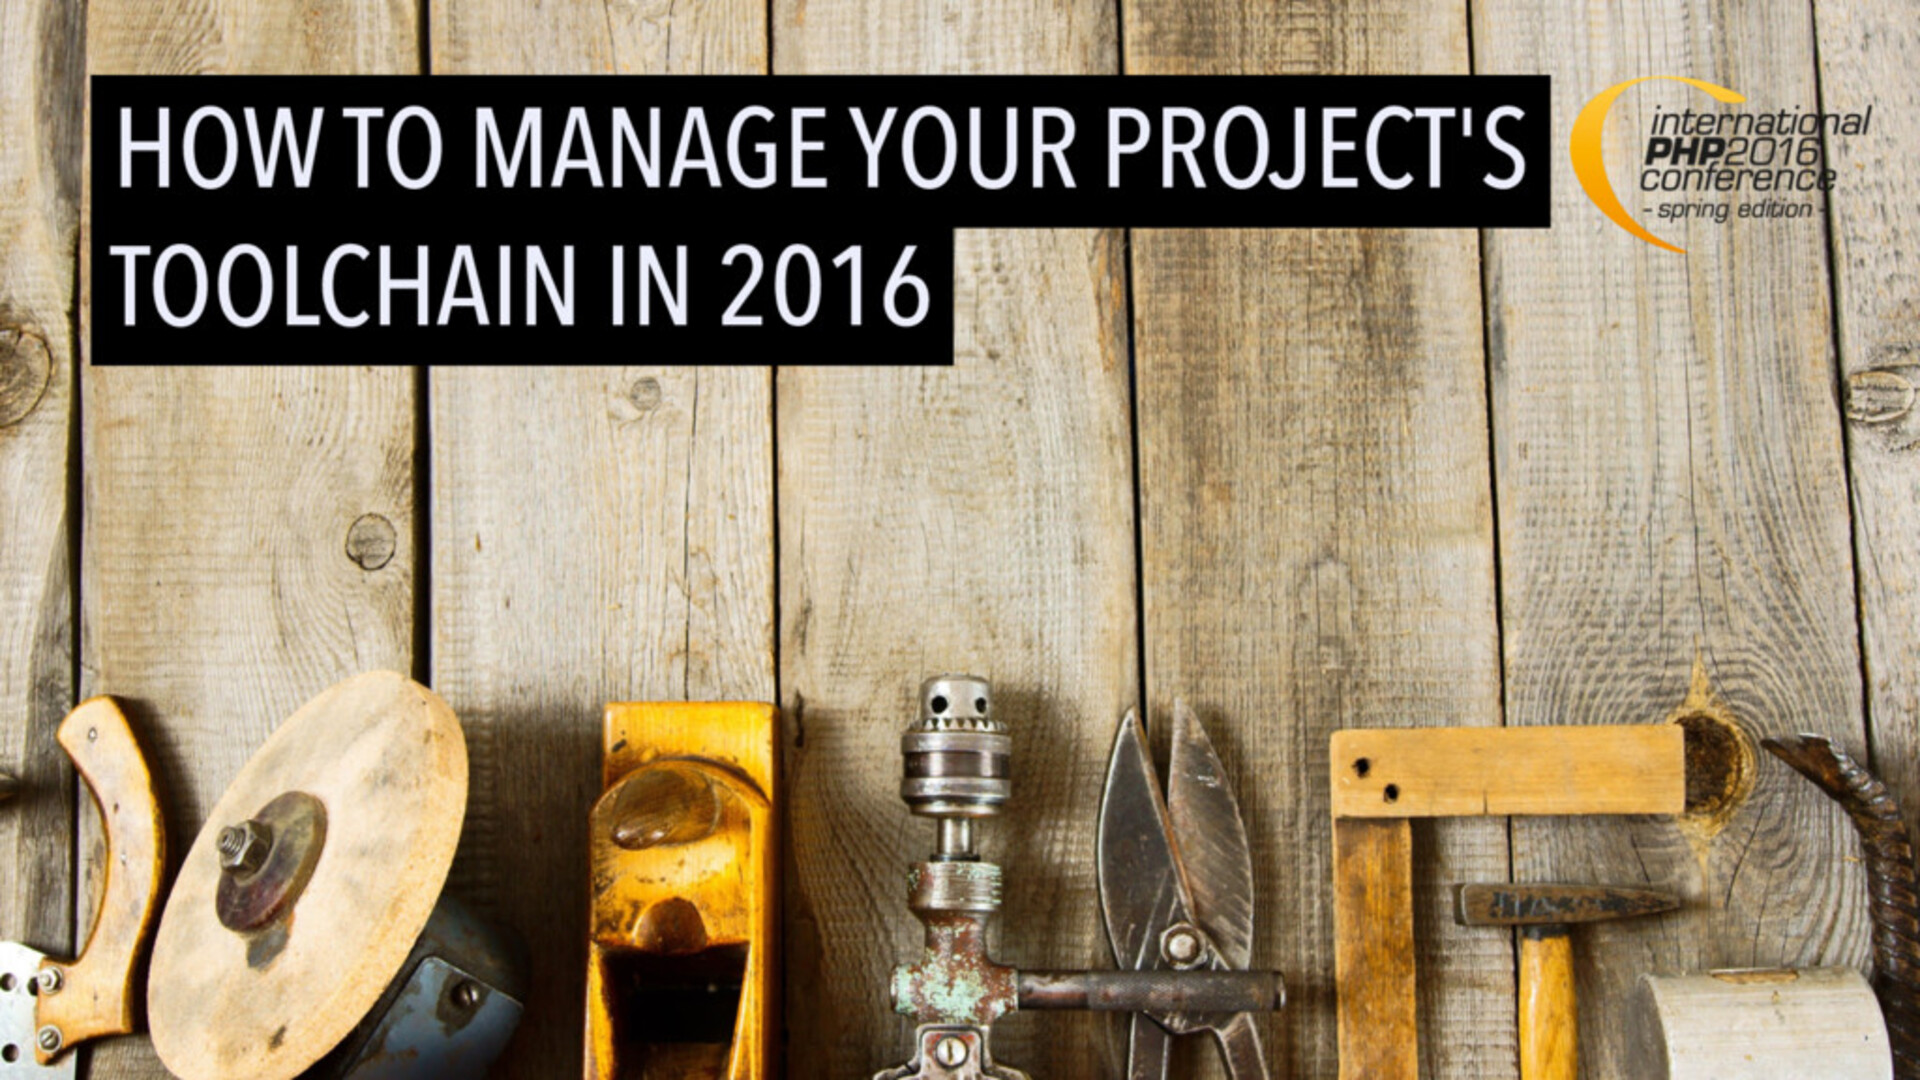 How to manage your project's toolchain in 2016